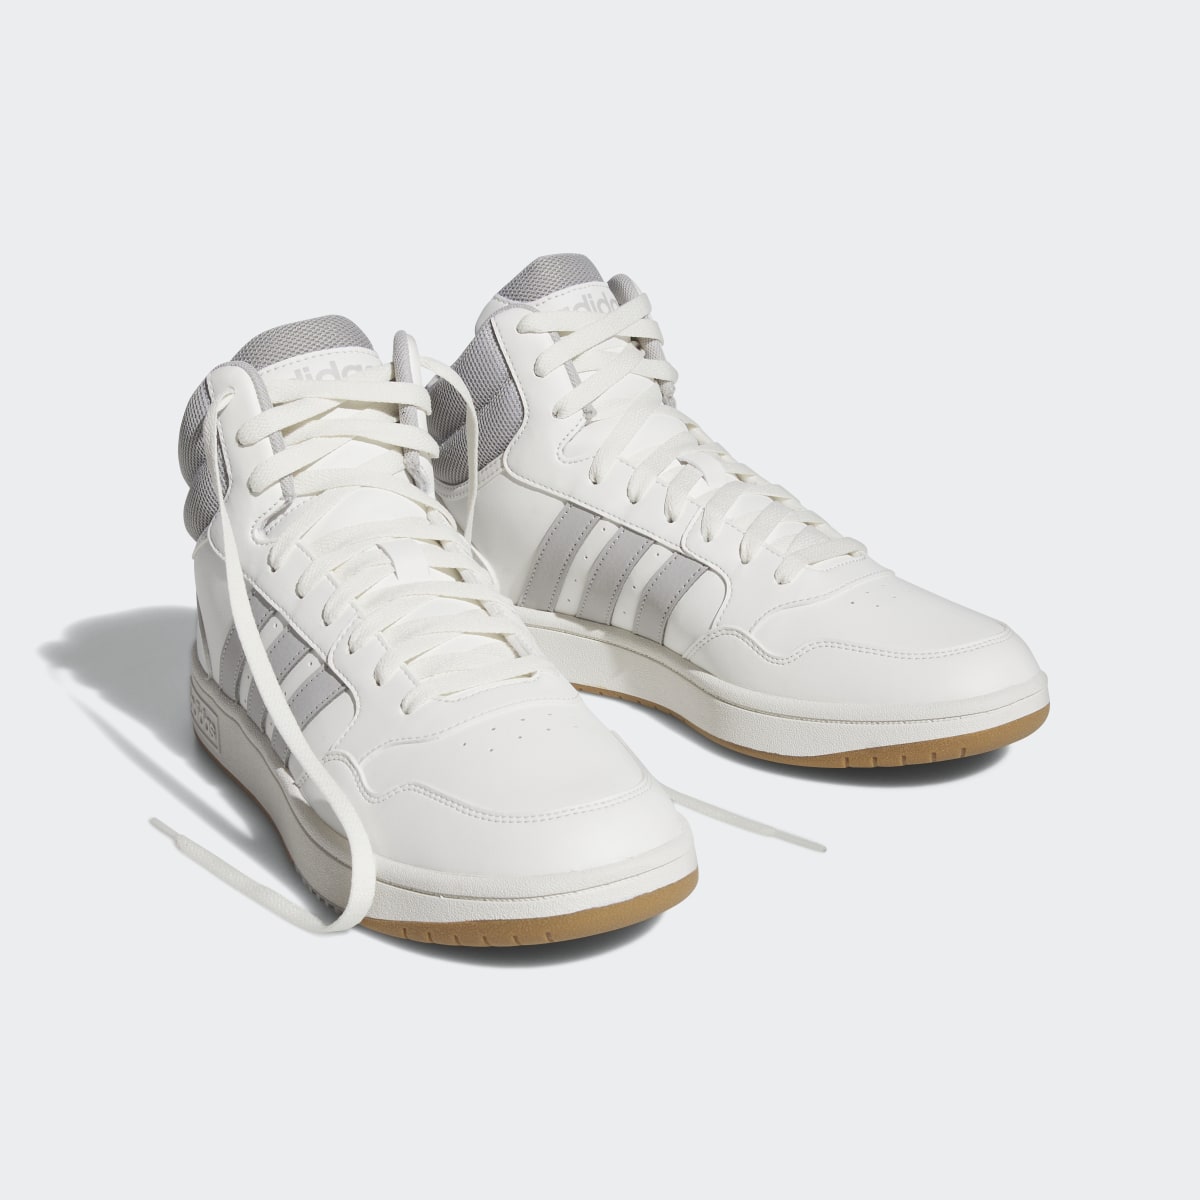 Adidas Hoops 3.0 Mid Lifestyle Basketball Classic Vintage Schuh. 5